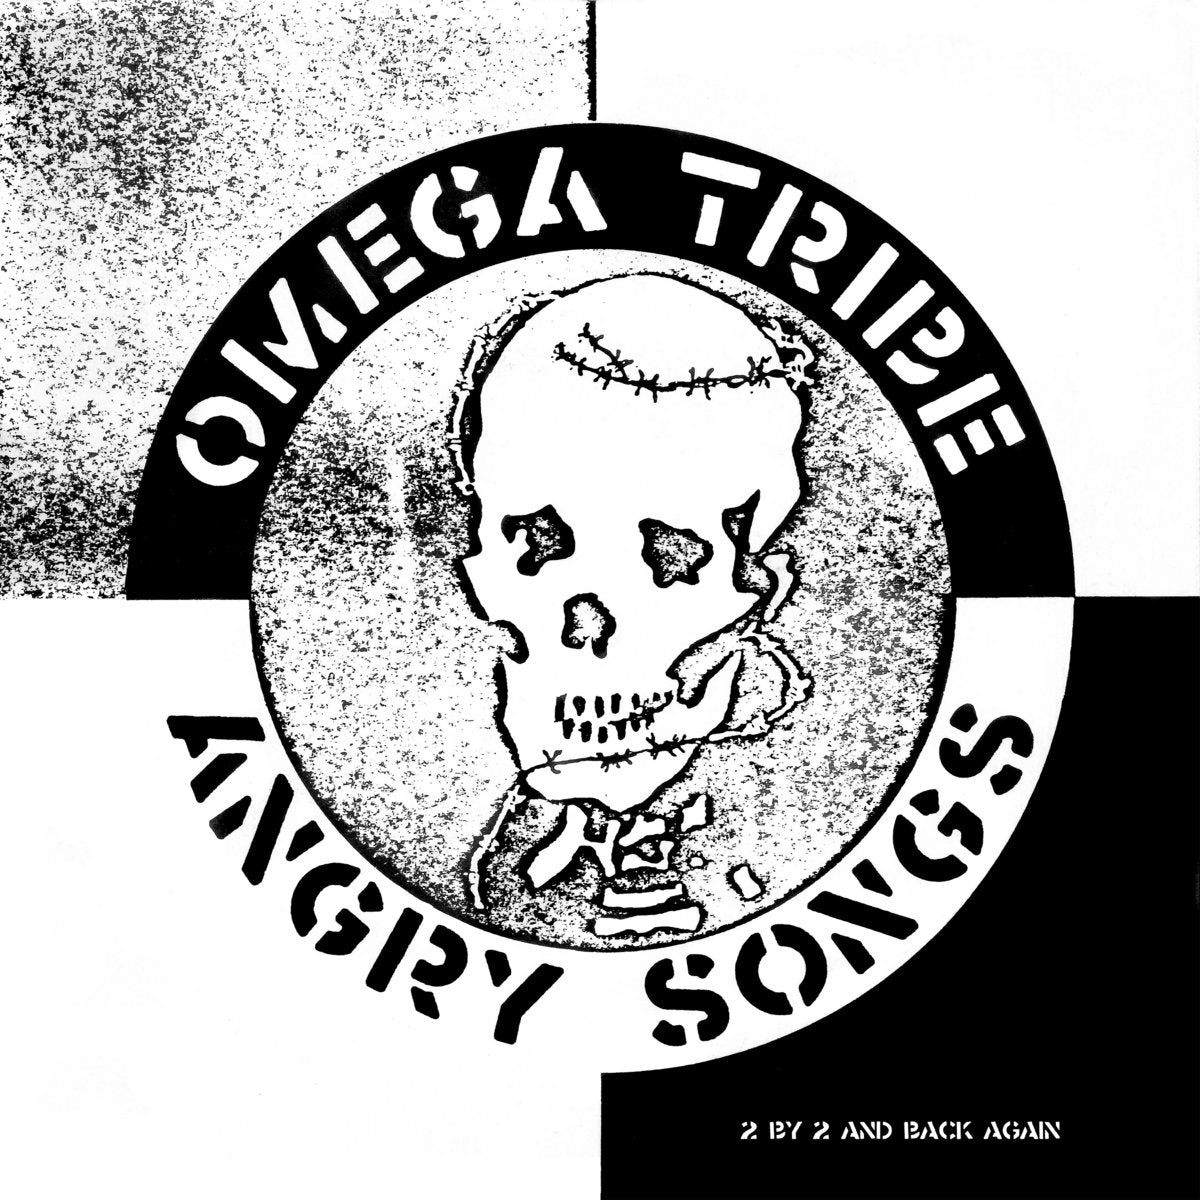 OMEGA TRIBE - ANGRY SONGS Vinyl 12”